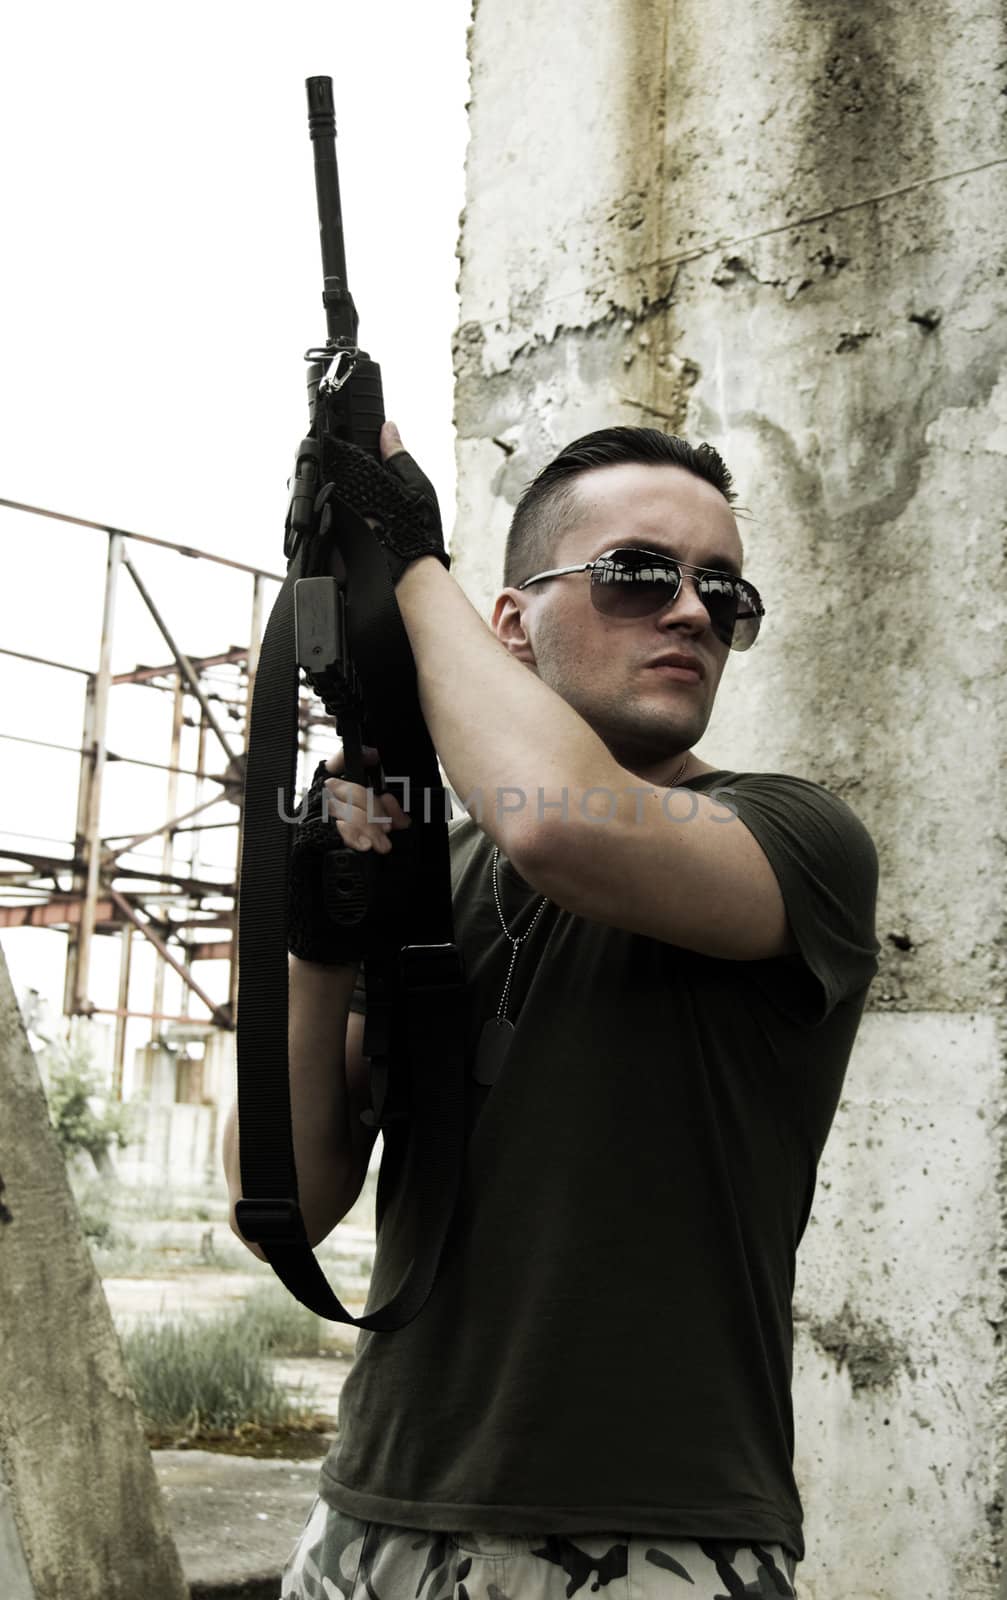 Soldier in camouflage and glasses with the gun up